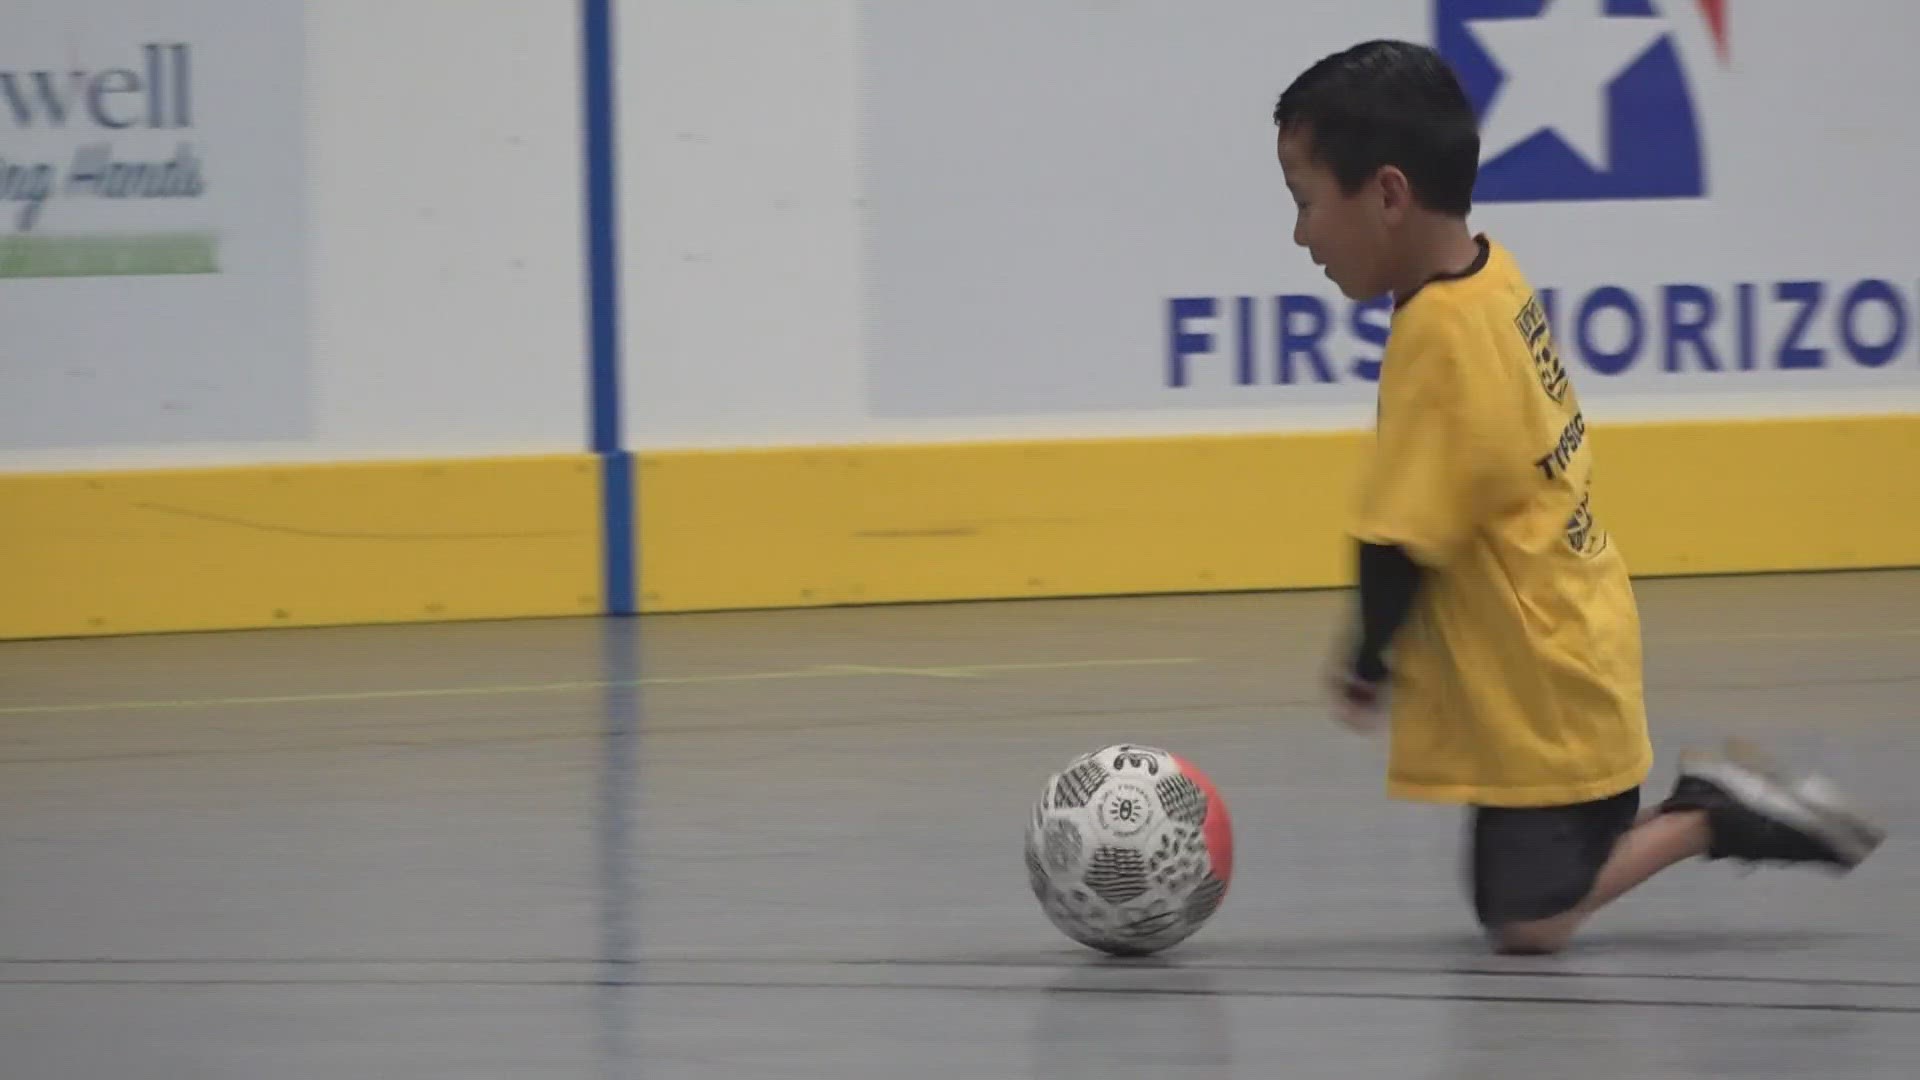 The event, held at the Change Center, brought kids and volunteers of all backgrounds together to play indoor soccer.